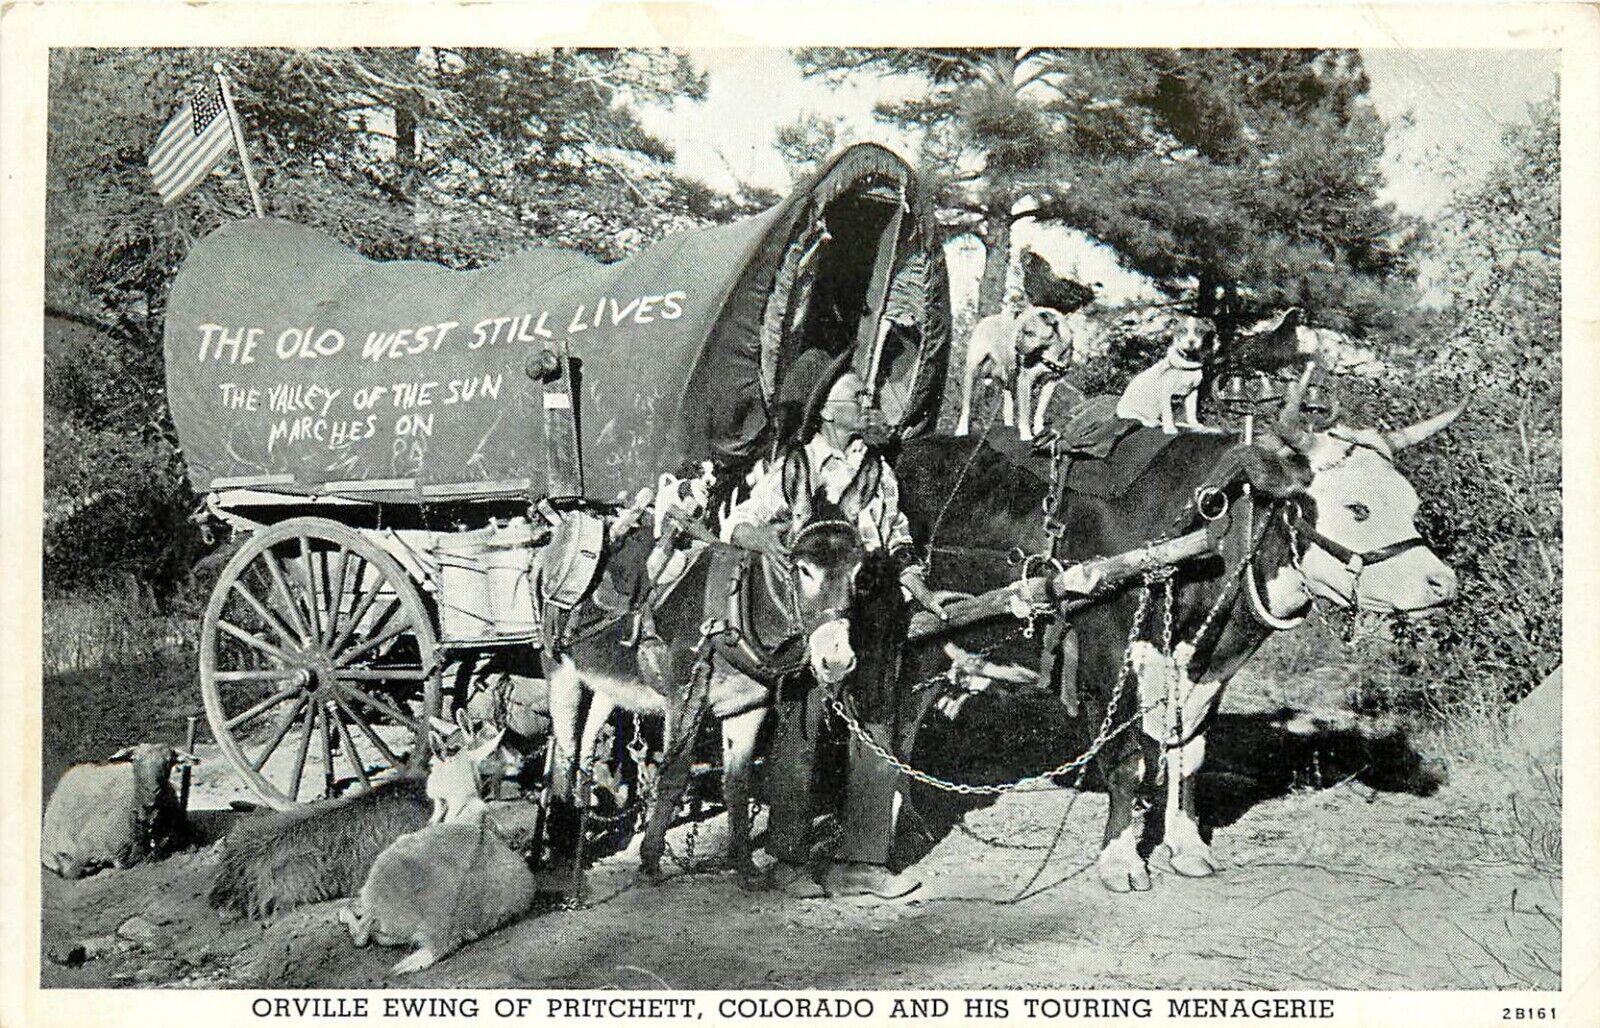 Postcard Orville Ewing & Traveling Menagerie Covered Wagon Pulled by Ox, C.Teich